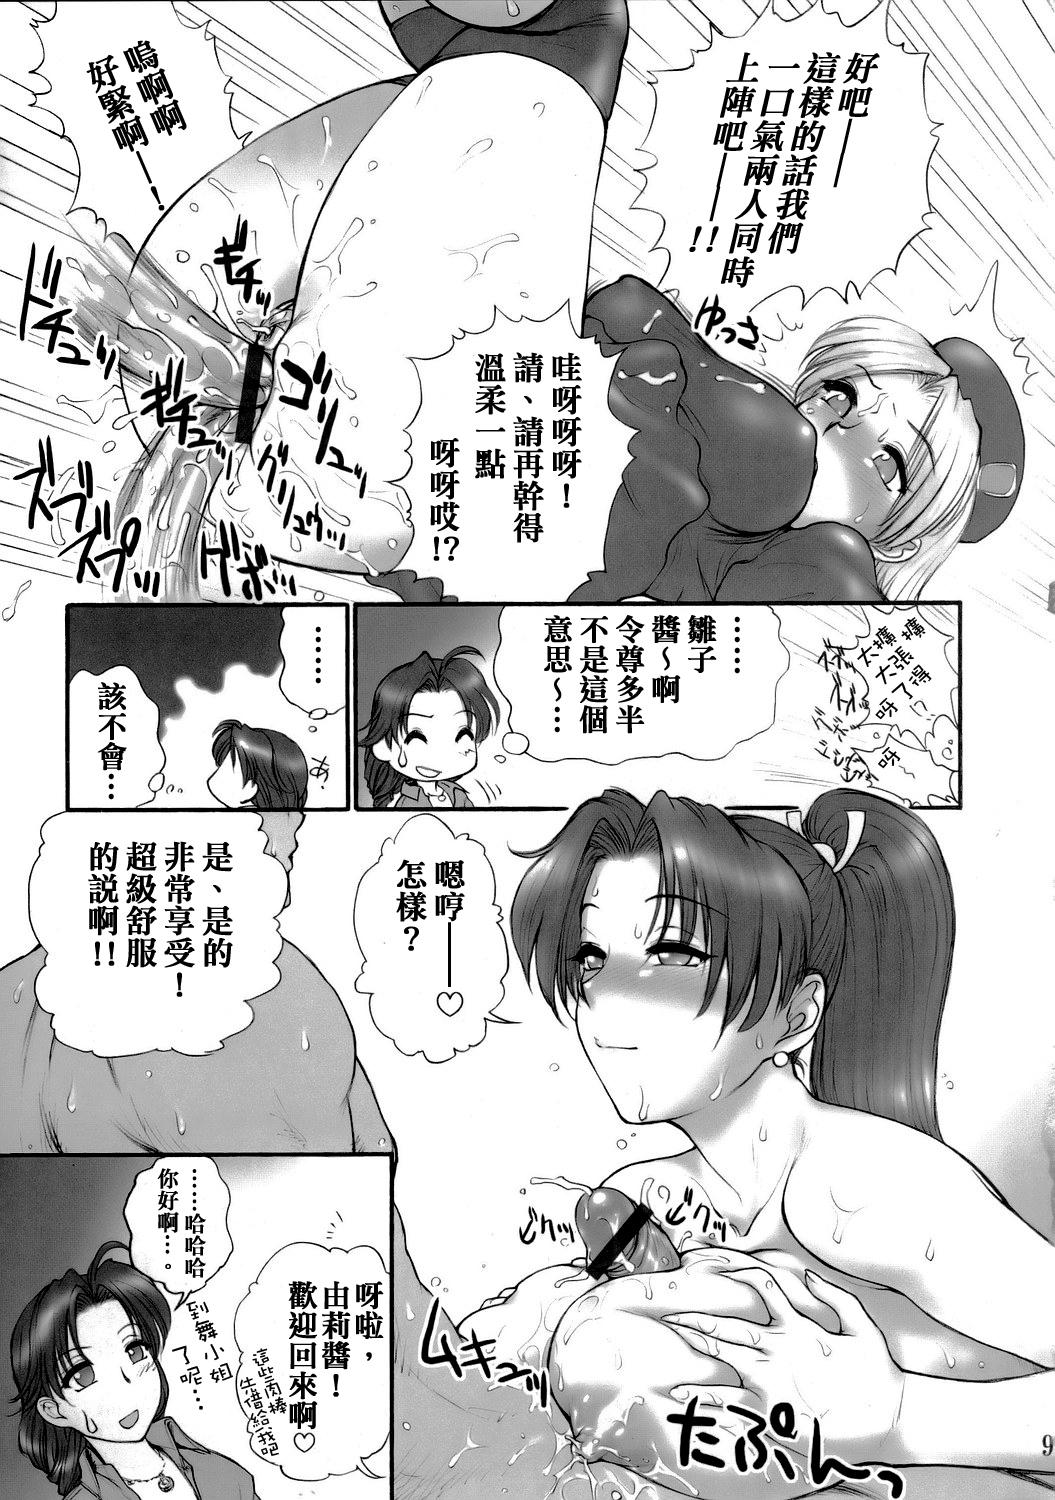 Black Dick (SC29) [Shinnihon Pepsitou (St. Germain-sal)] Report Concerning Kyoku-gen-ryuu (The King of Fighters) [Chinese] [日祈漢化] - King of fighters Pussylick - Page 11